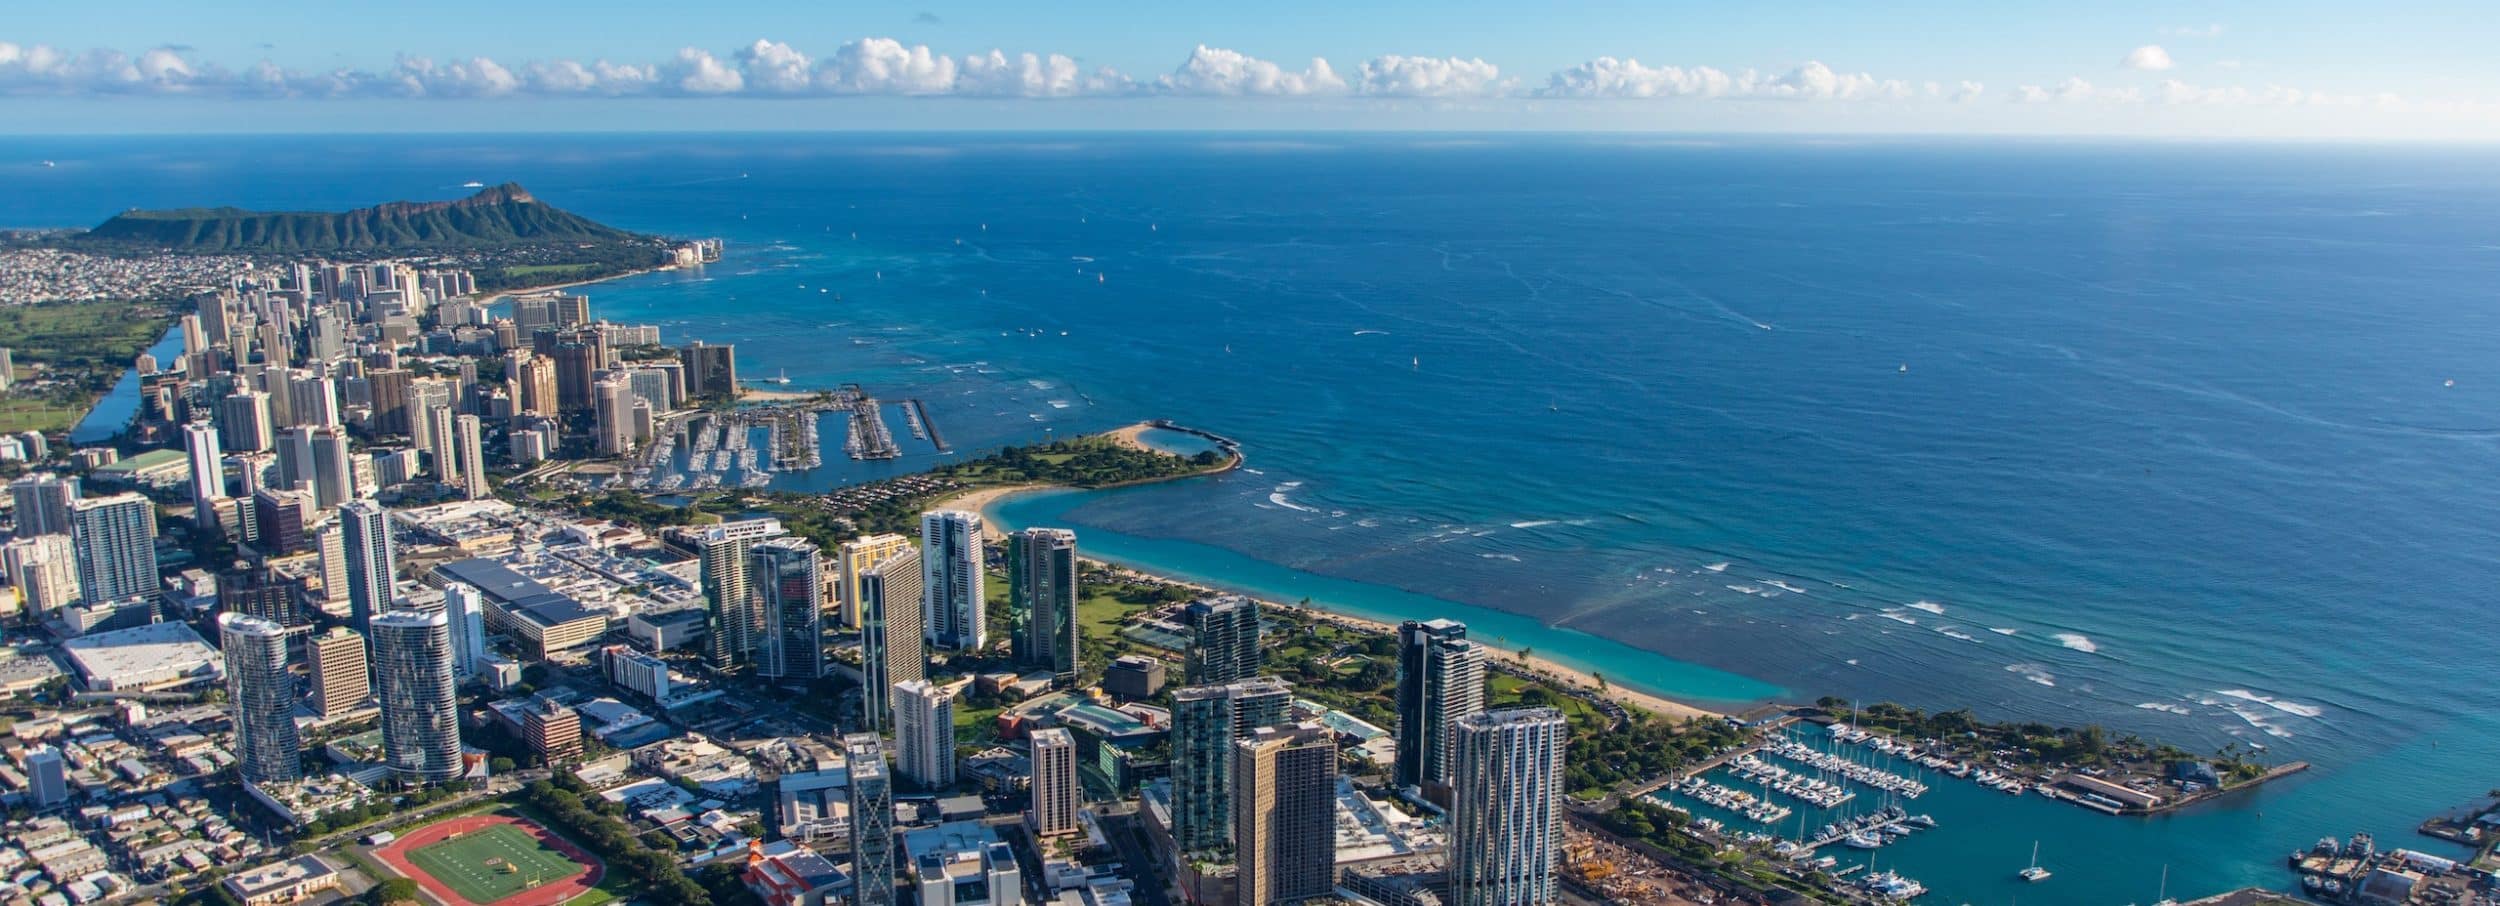 Aerial shot of Waikiki and Diamond head and the buildings in between